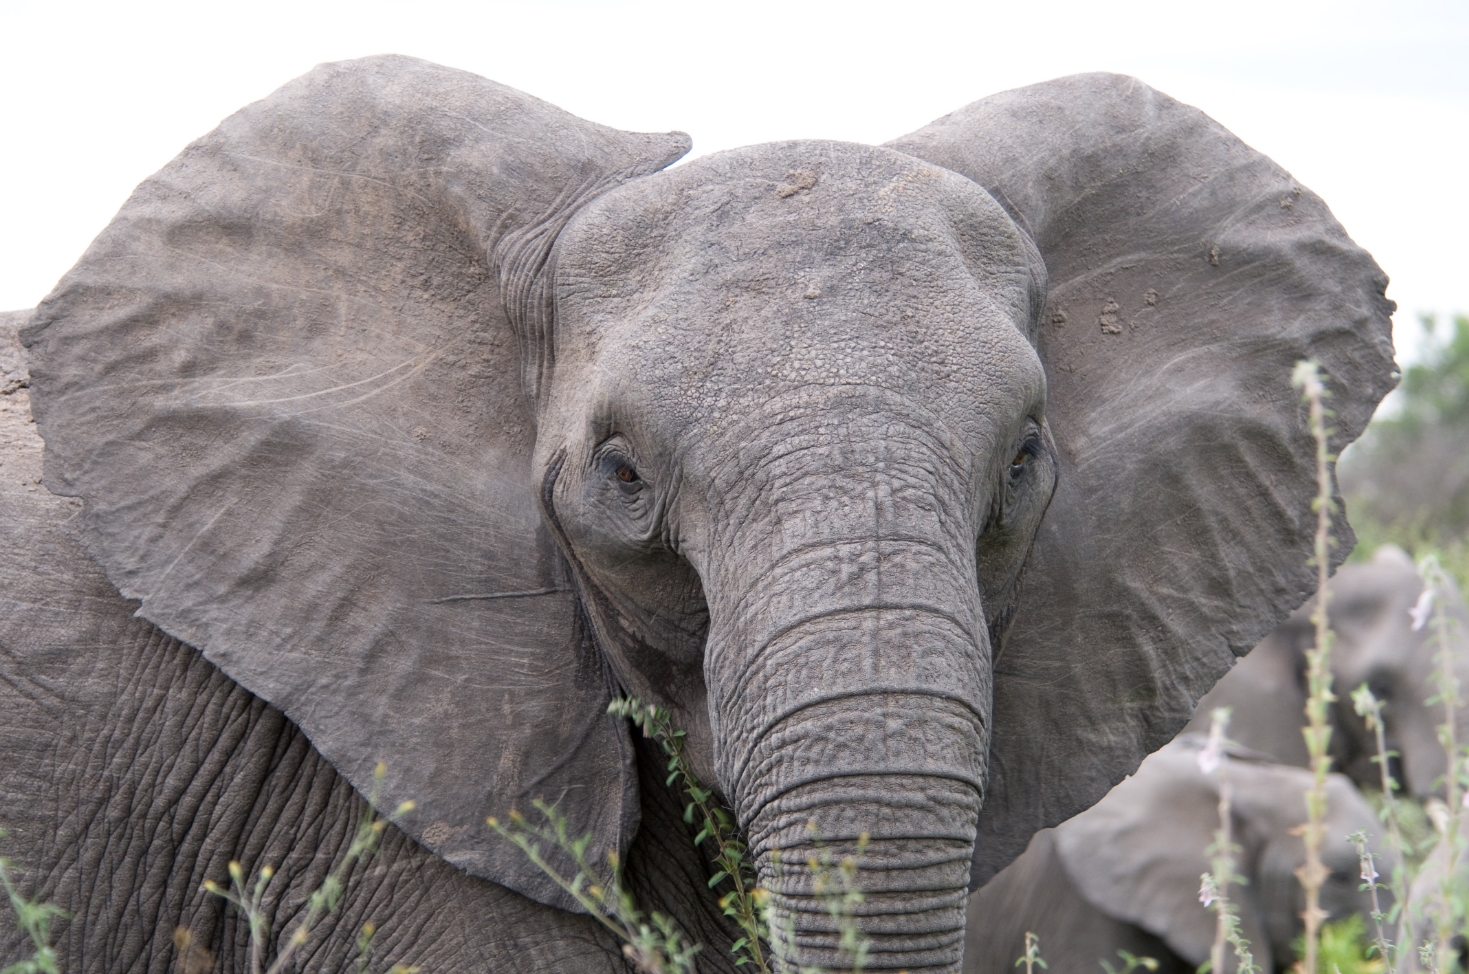 Image: TNT-sniffing elephants could soon be assisting landmine-location efforts in Angola